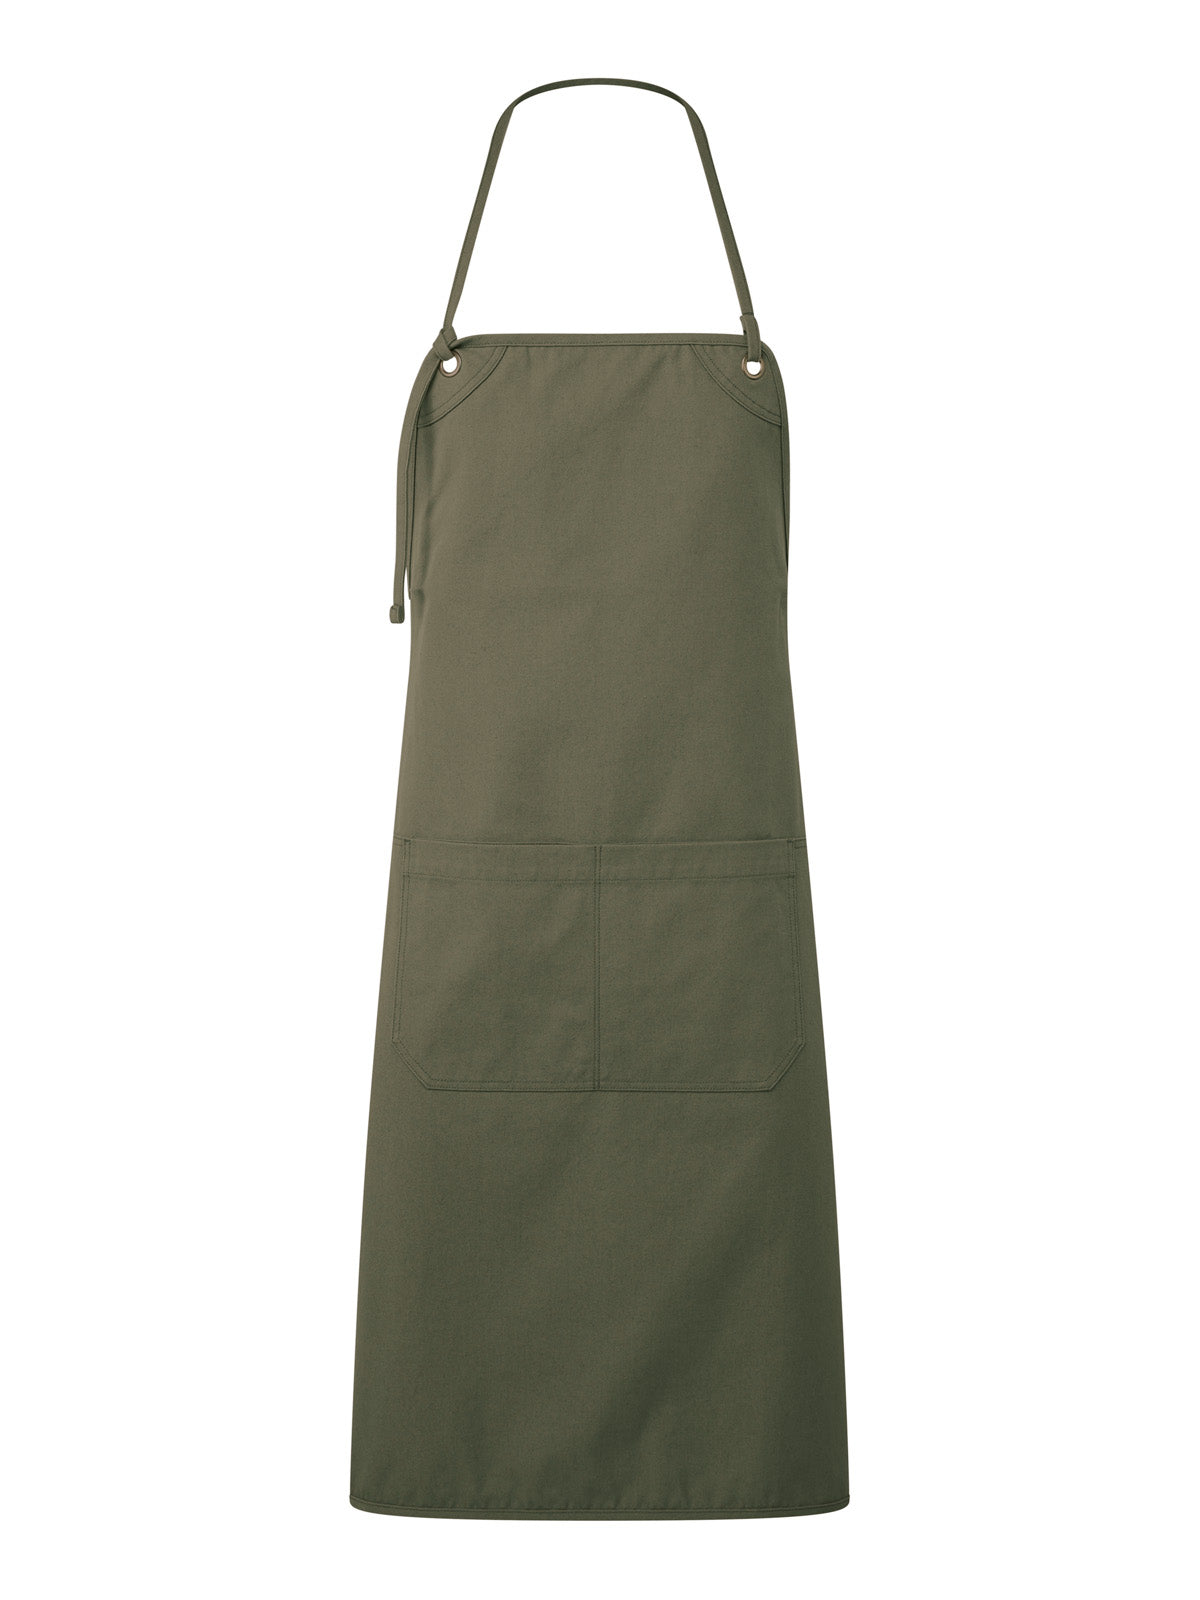 Artisan’s Choice’ Double Pocket Canvas Apron in Olive